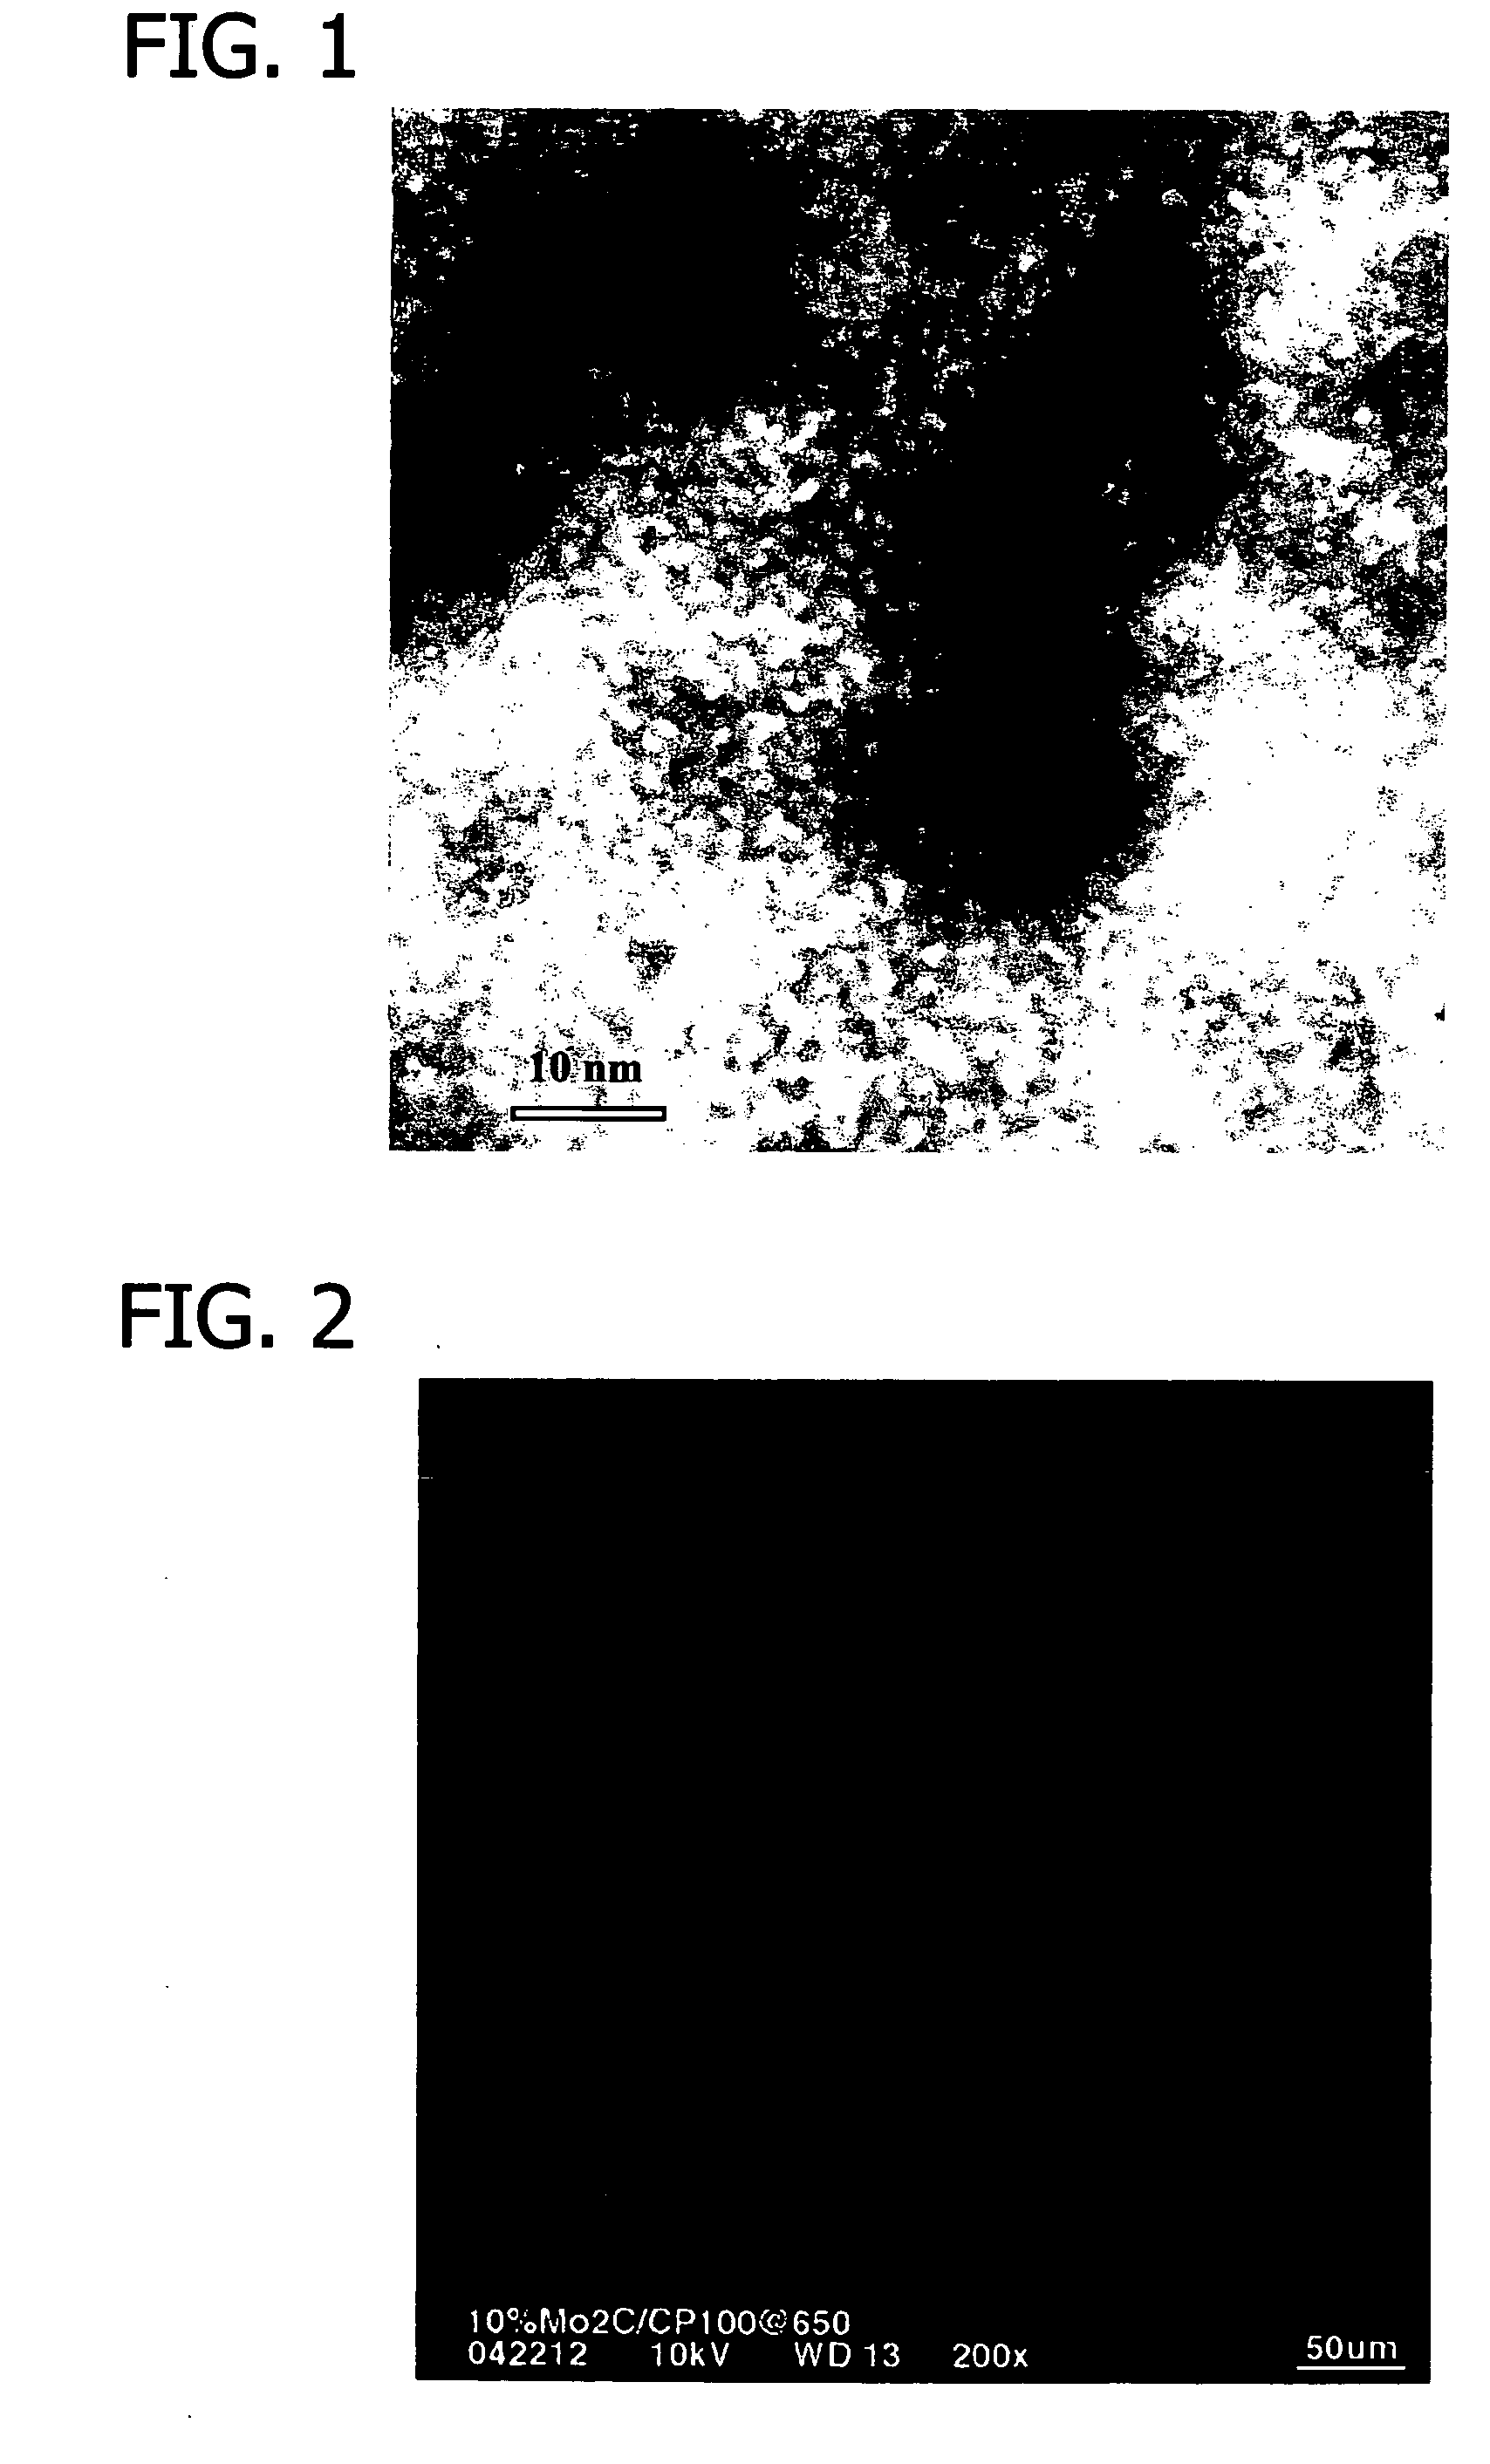 Transition metal-containing catalysts and catalyst combinations including transition metal-containing catalysts and processes for their preparation and use as oxidation catalysts